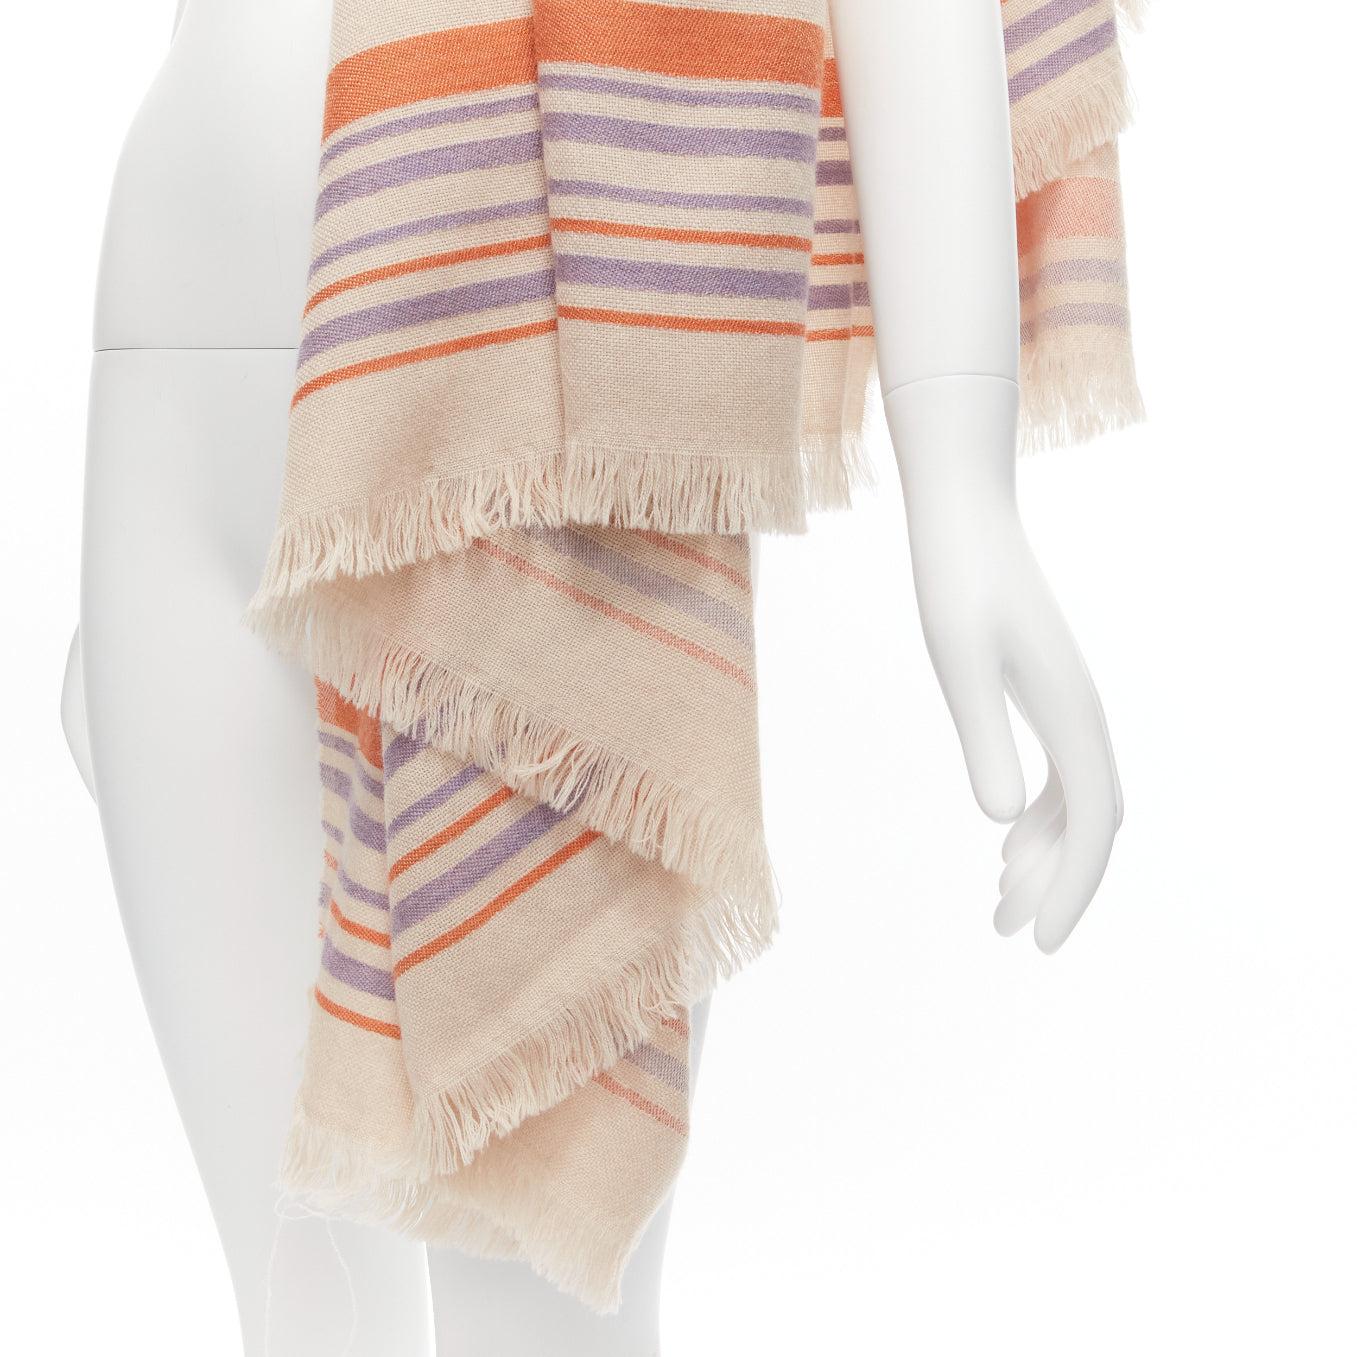 ETRO Home Collection 100% merino wool beige logo stripes fringe scarf
Reference: LNKO/A02200
Brand: Etro
Collection: Home Collection
Material: Merino Wool
Color: Beige, Multicolour
Pattern: Striped
Made in: Italy

CONDITION:
Condition: Very good,